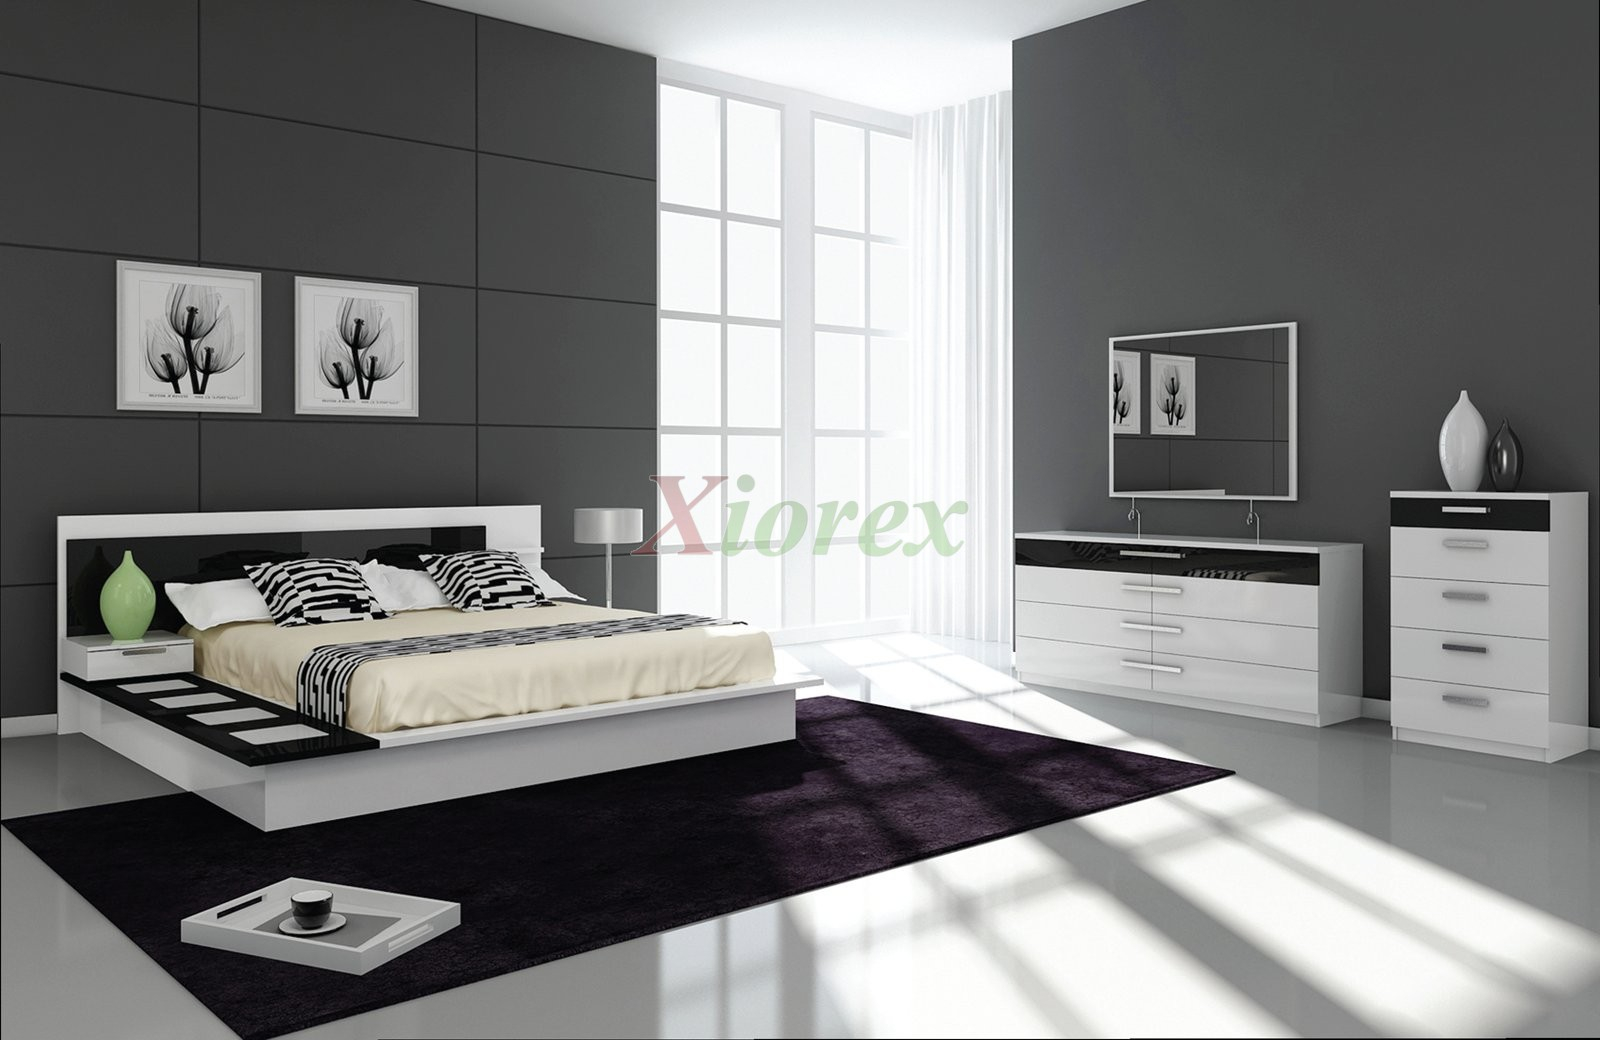 Draco Black And White Contemporary Bedroom Furniture Sets for size 1600 X 1040